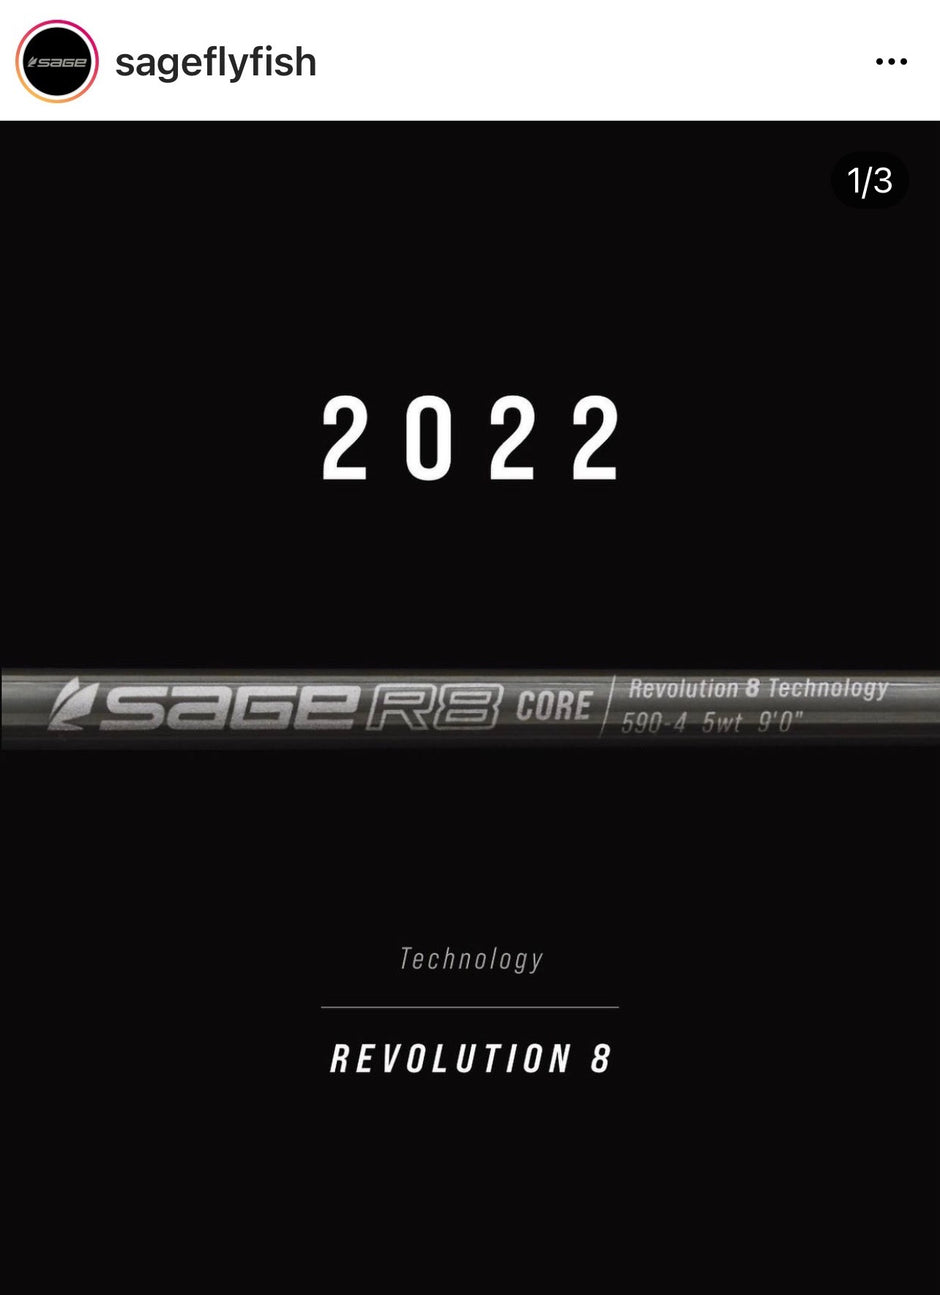 Sage R8 Core Fly Rods Announced - New for 2022!